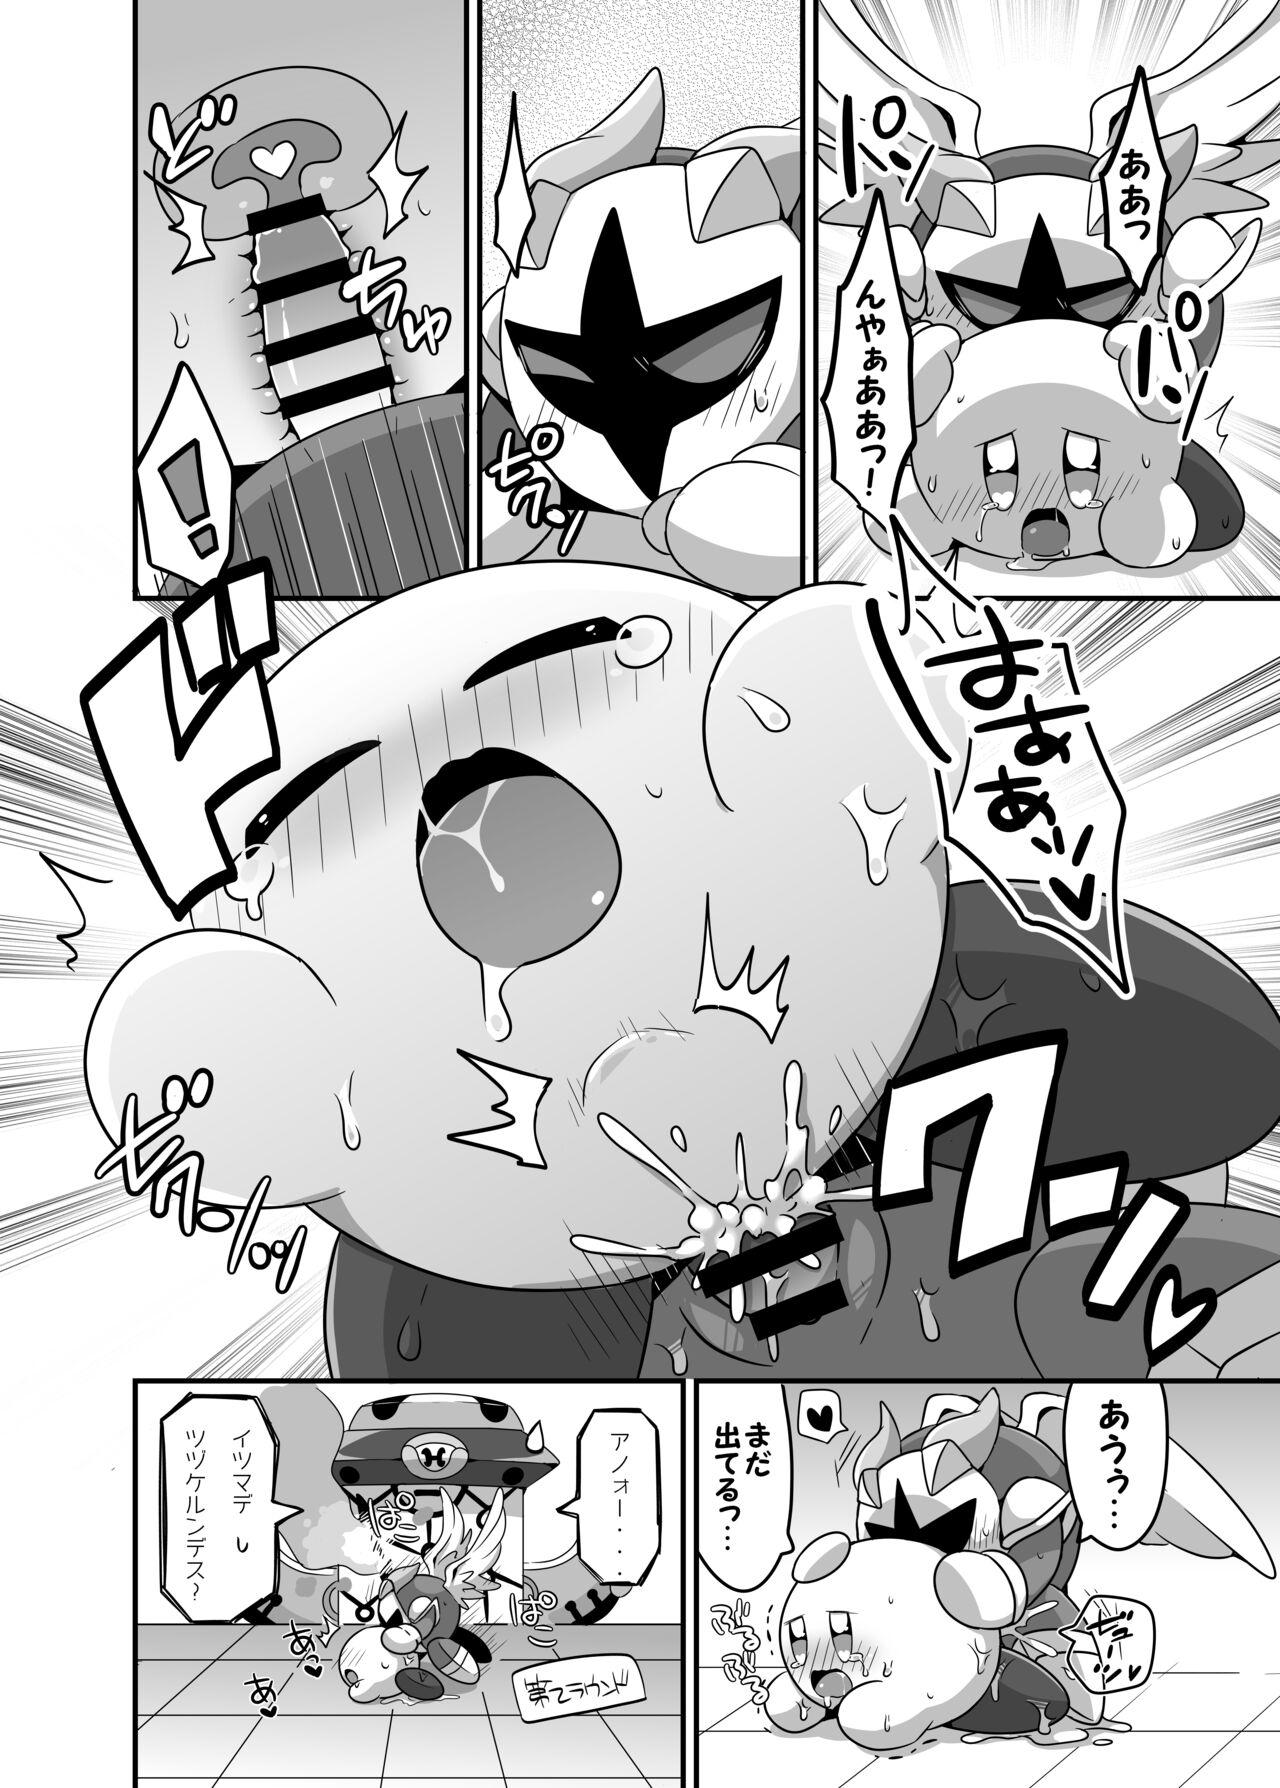 Calle I Want to Do XXX Even For Spheres! - Kirby Cavalgando - Page 6